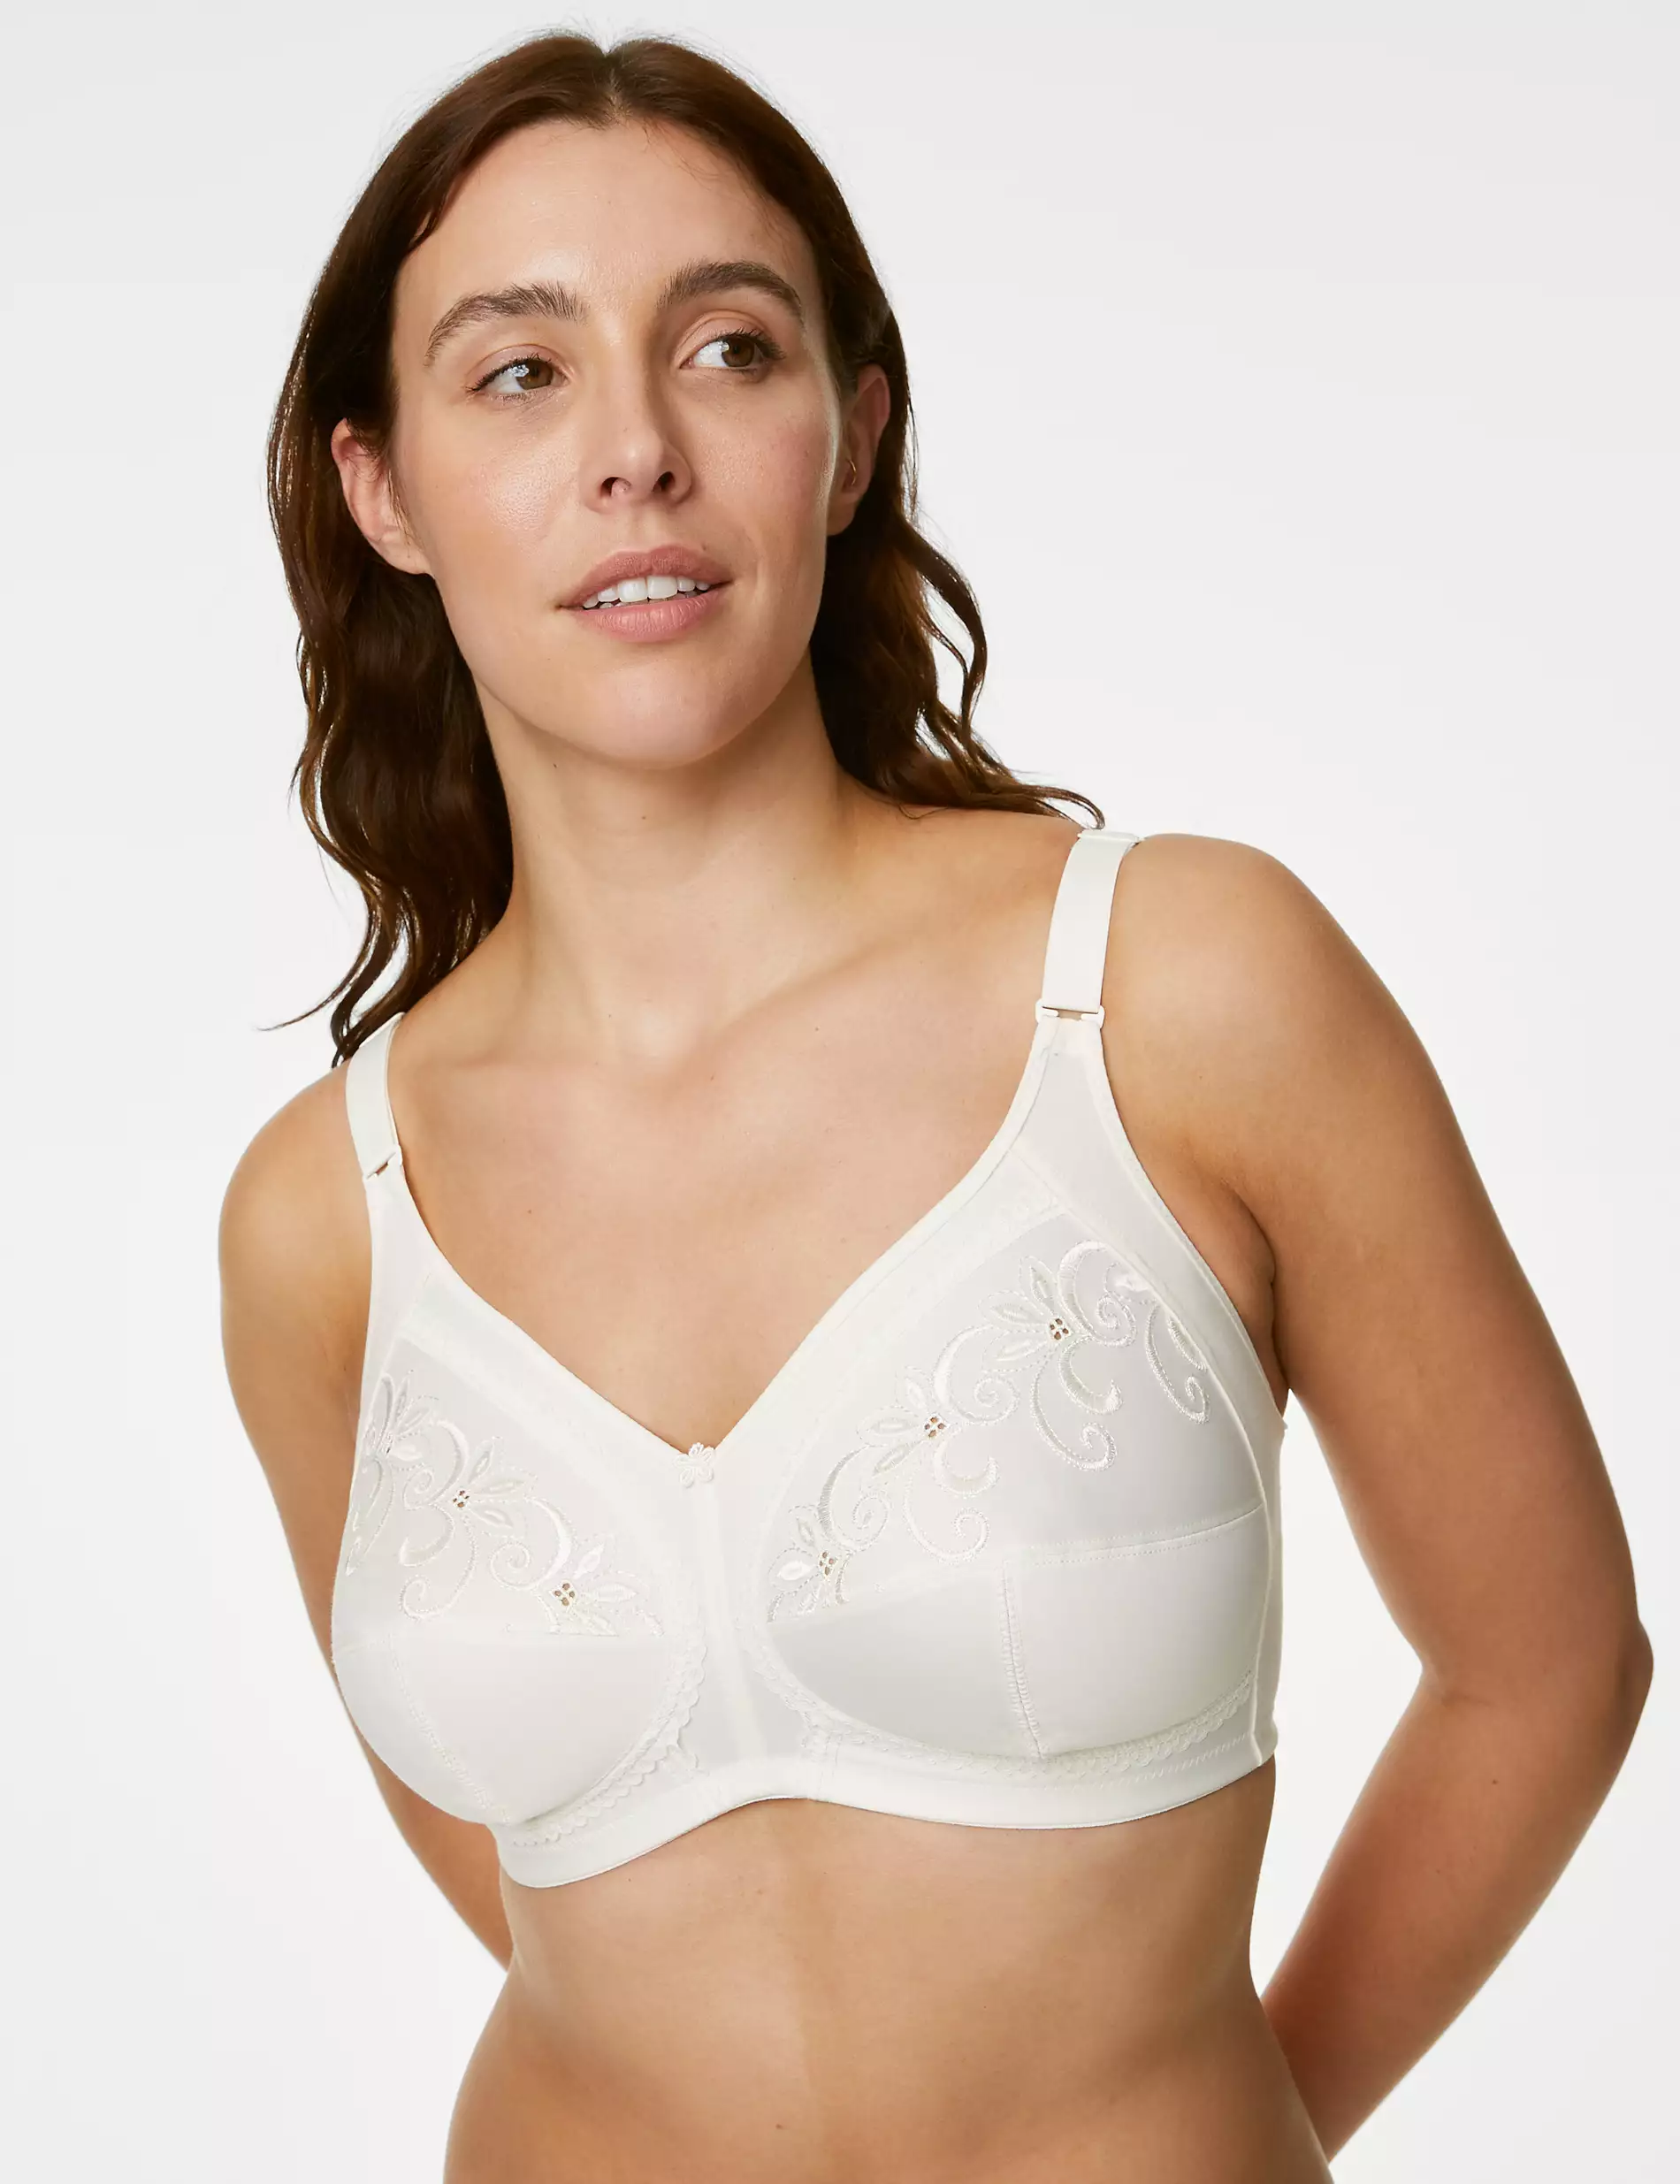 M&S BOUTIQUE HEART EMBROIDERY UNDERWIRED FULL CUP BRA in WHITE MIX